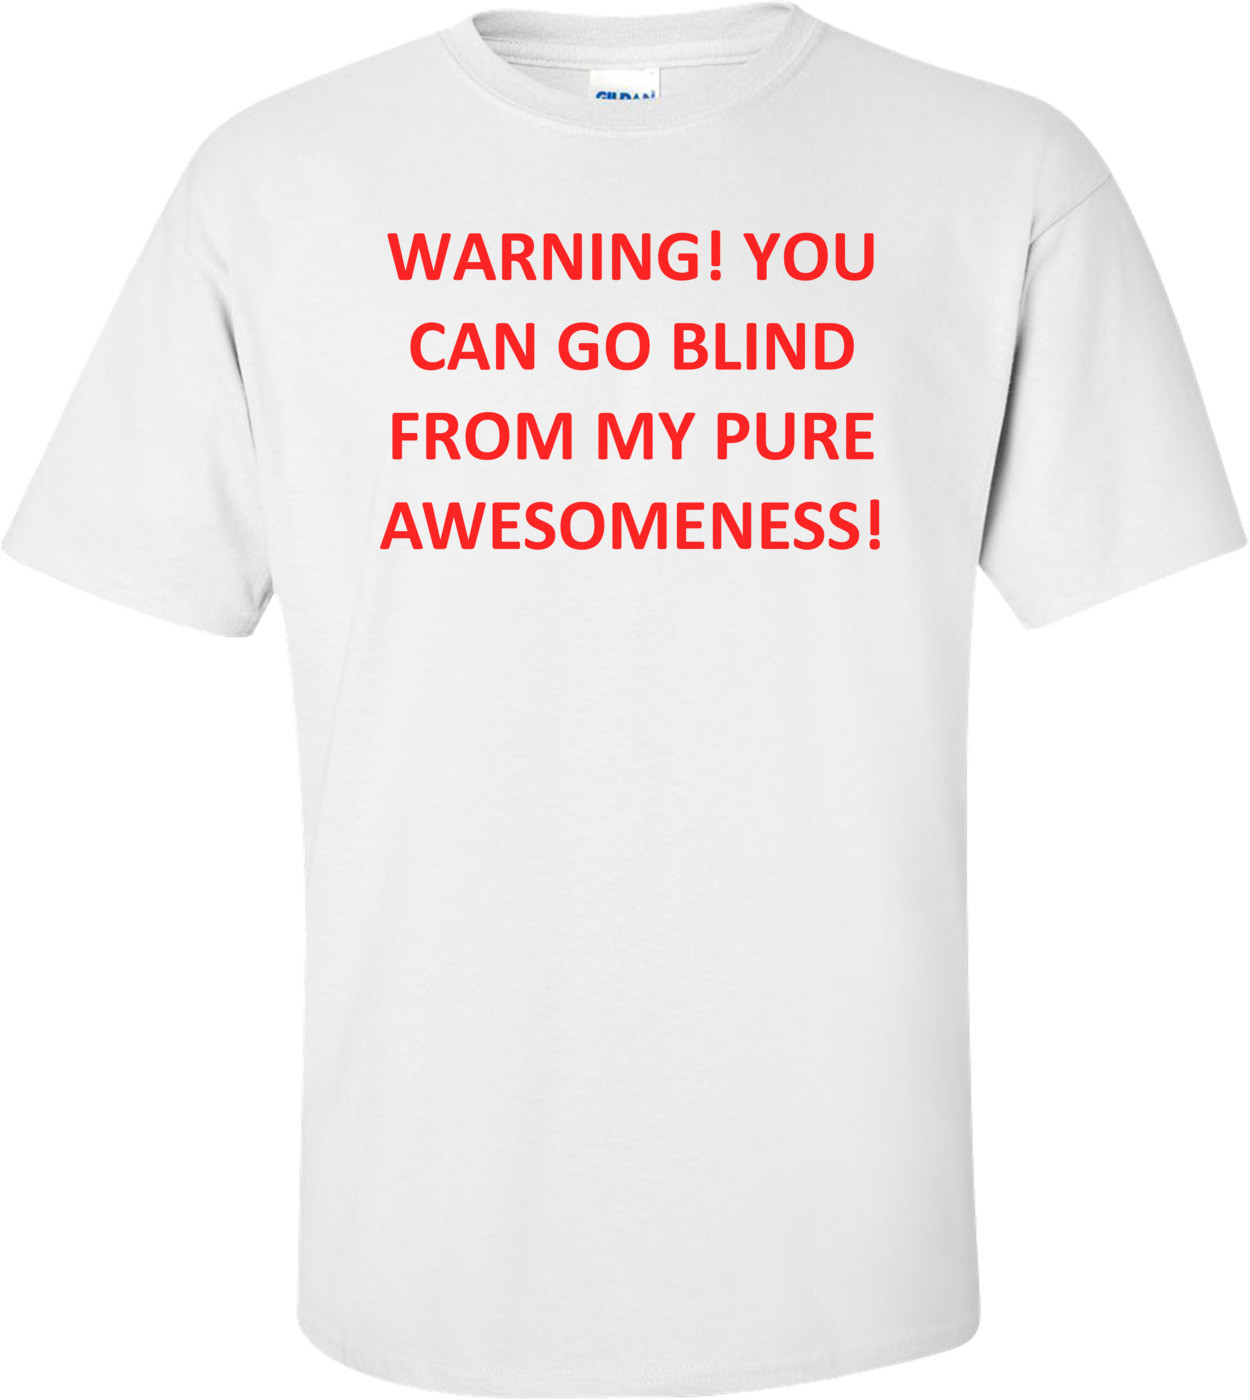 WARNING! YOU CAN GO BLIND FROM MY PURE AWESOMENESS!